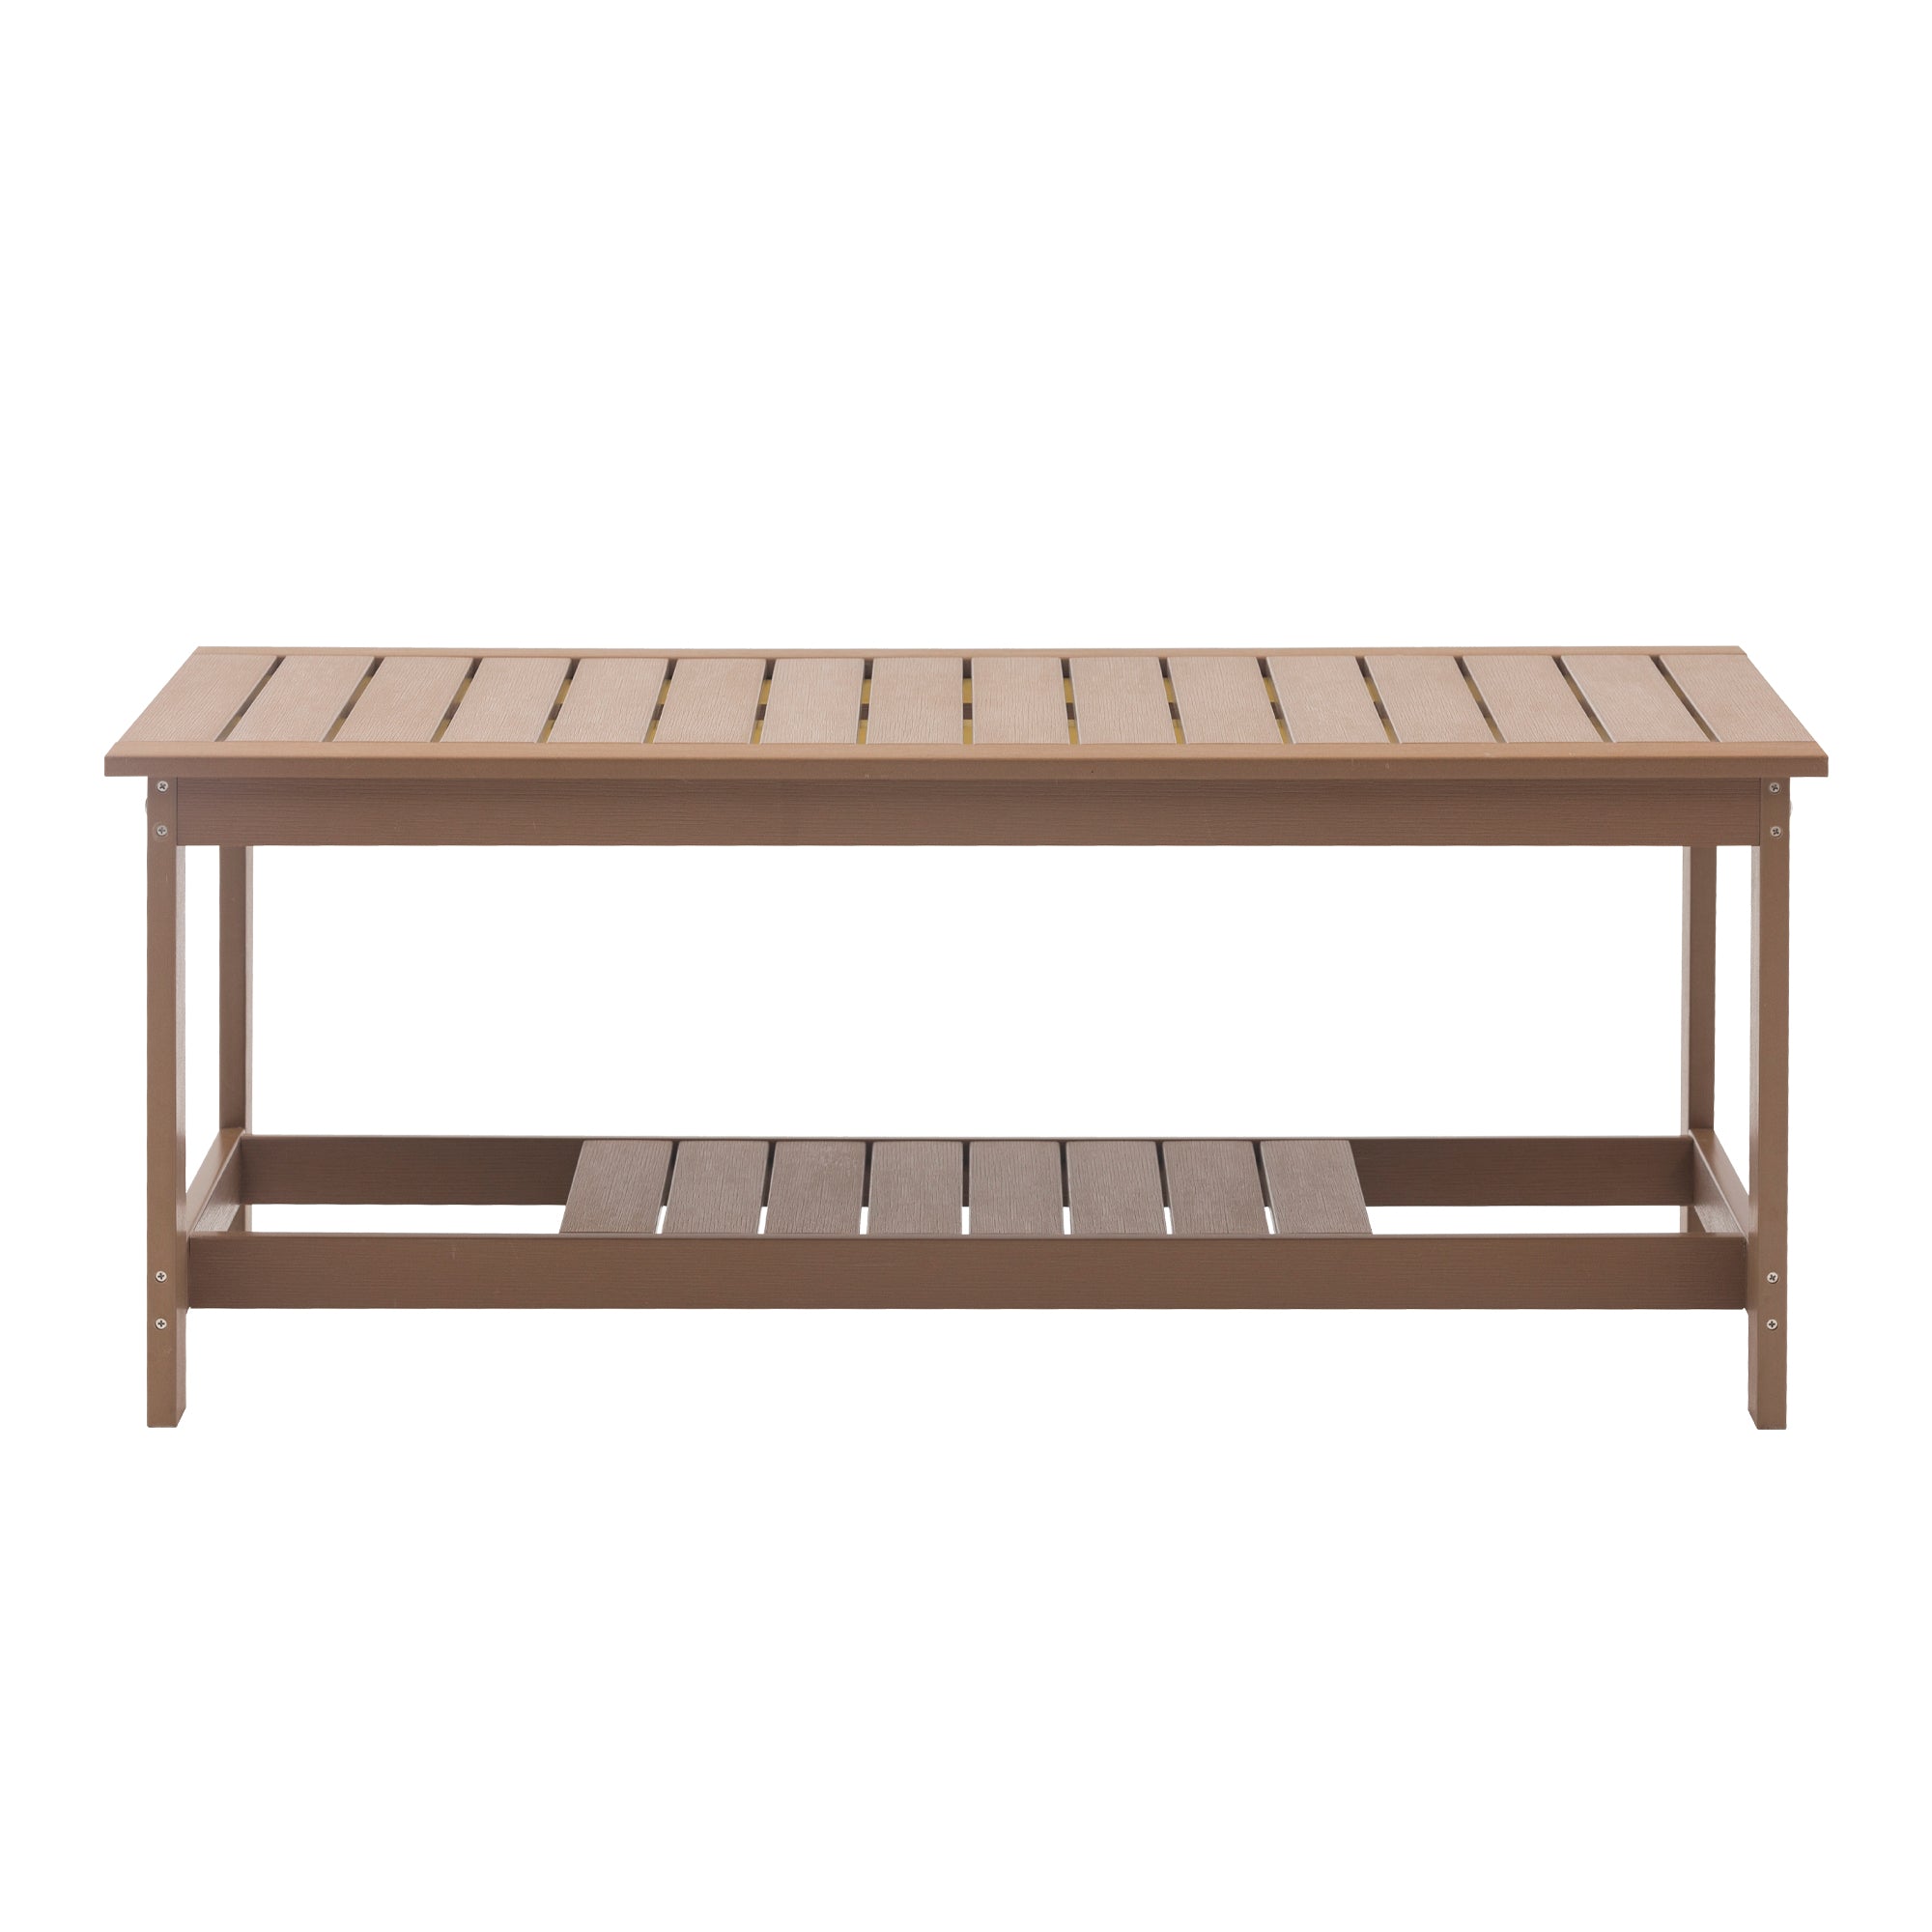 45inch outdoor rectangular resin coffee table